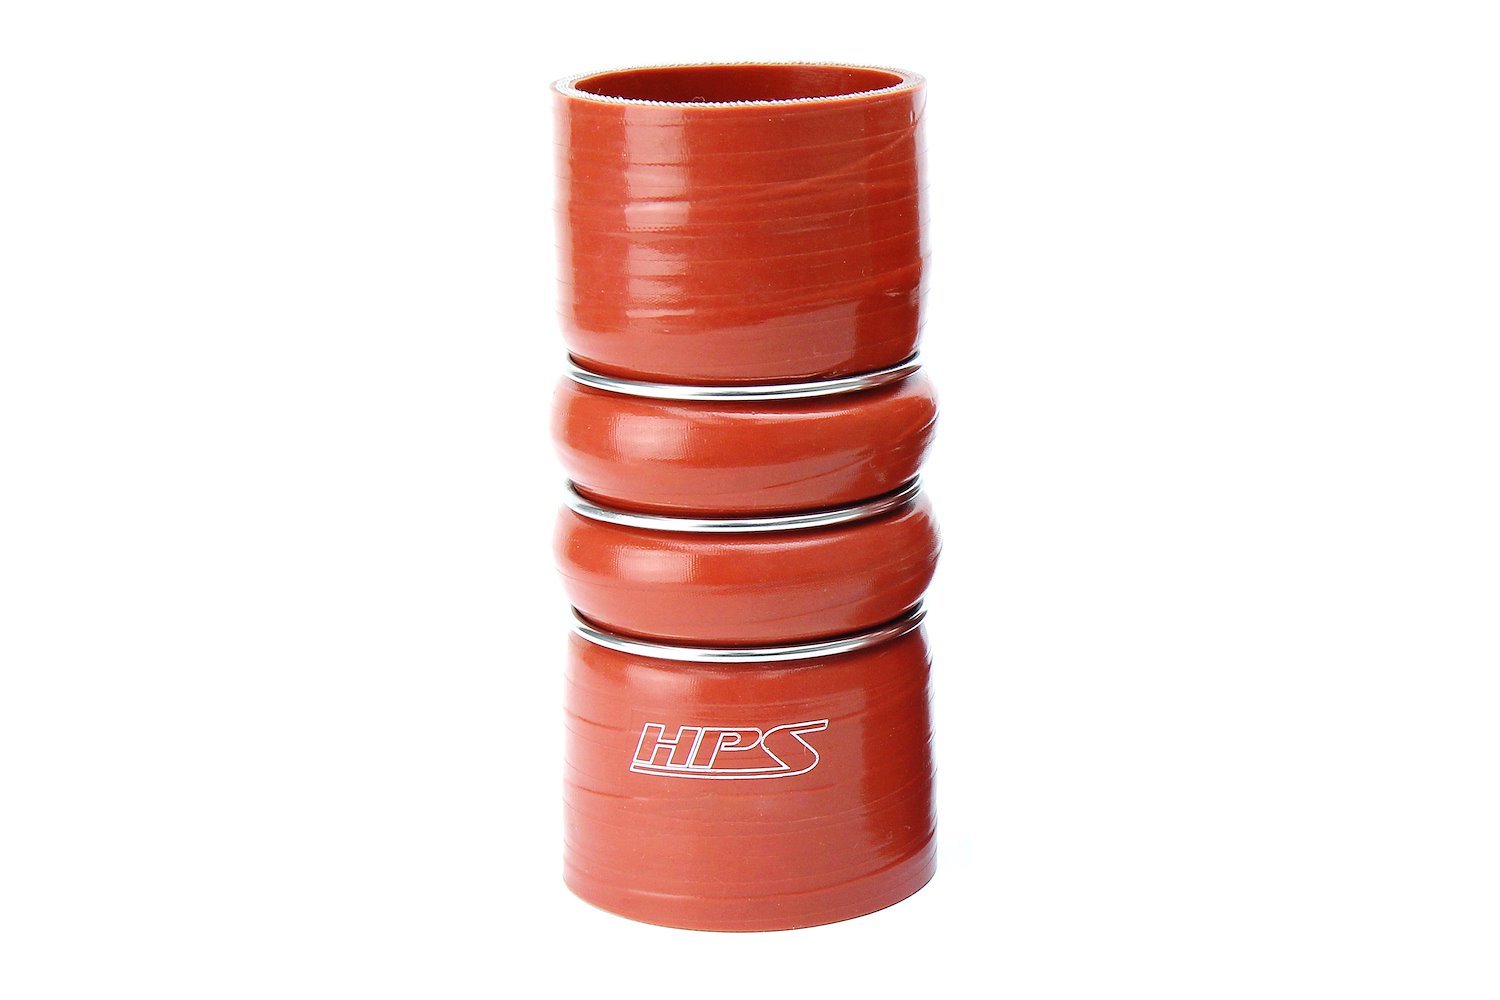 P8-CAC-600-L8-HOT Silicone CAC Hump Hose Hot, High-Temp 8-Ply Aramid Reinforced, 6 in. ID, 8 in. Long